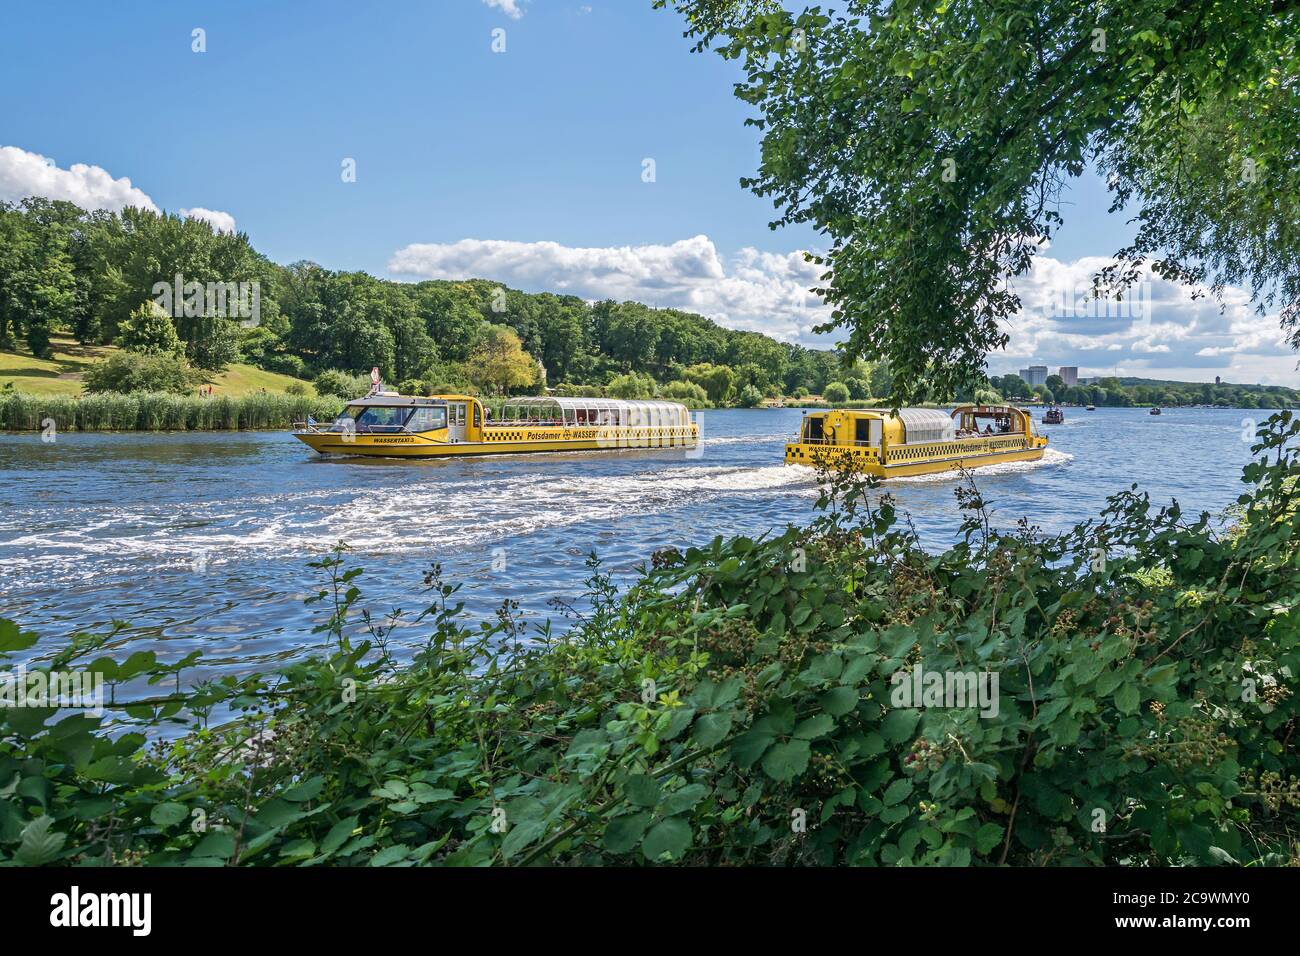 Potsdam, Germany -  July 12, 2020: Tiefer See (Tiefe Lake) with the Potsdam Water Taxi, a scheduled service by ship with a fixed schedule in the capit Stock Photo